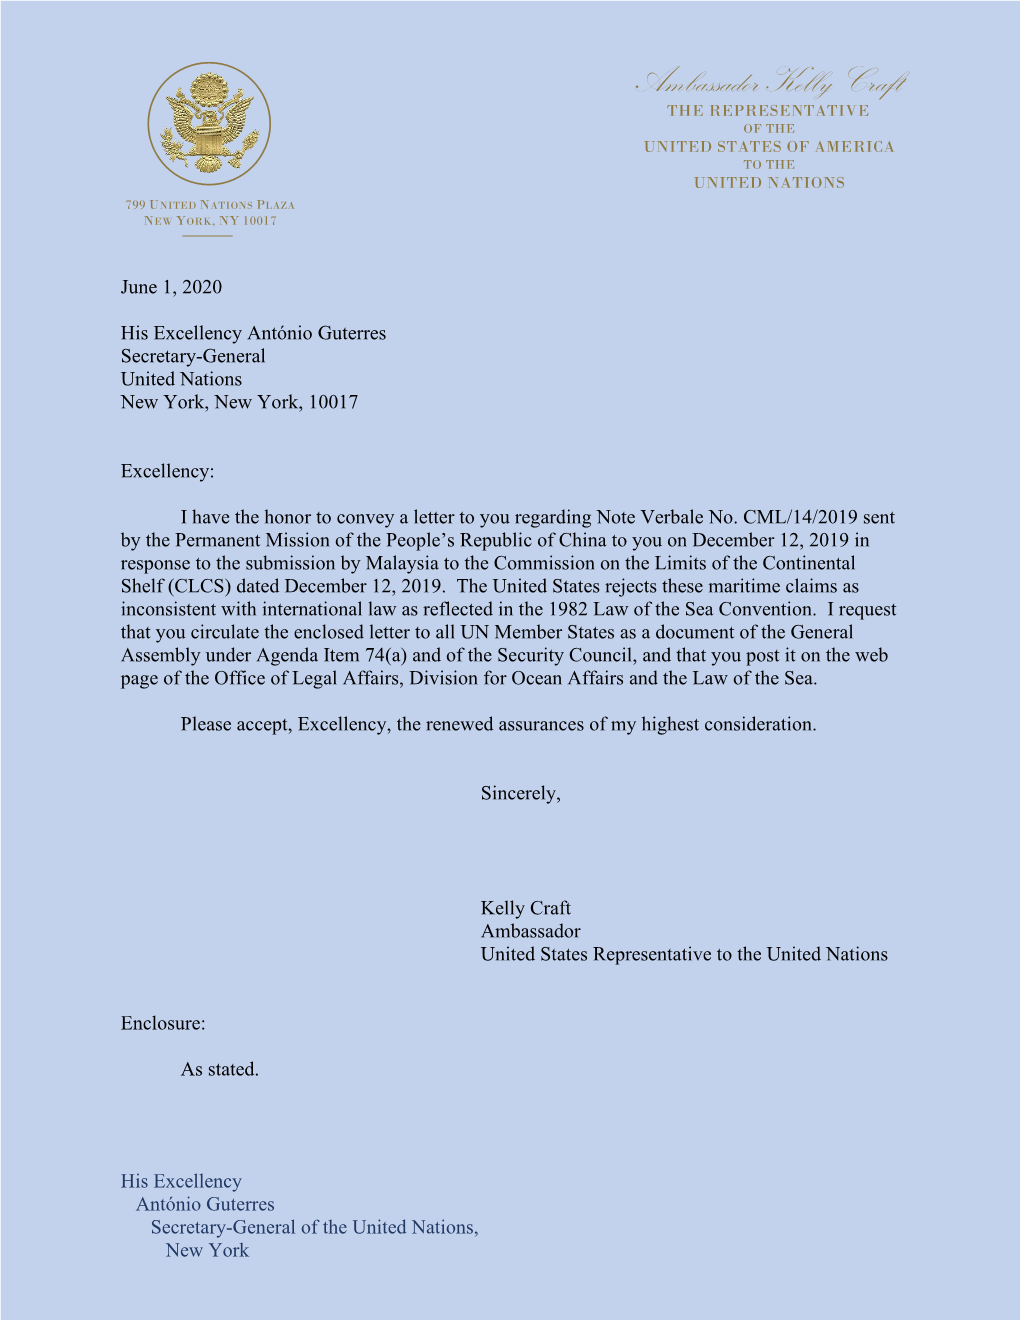 Letter from Ambassador Kelly Craft to Secretary-General António Guterres